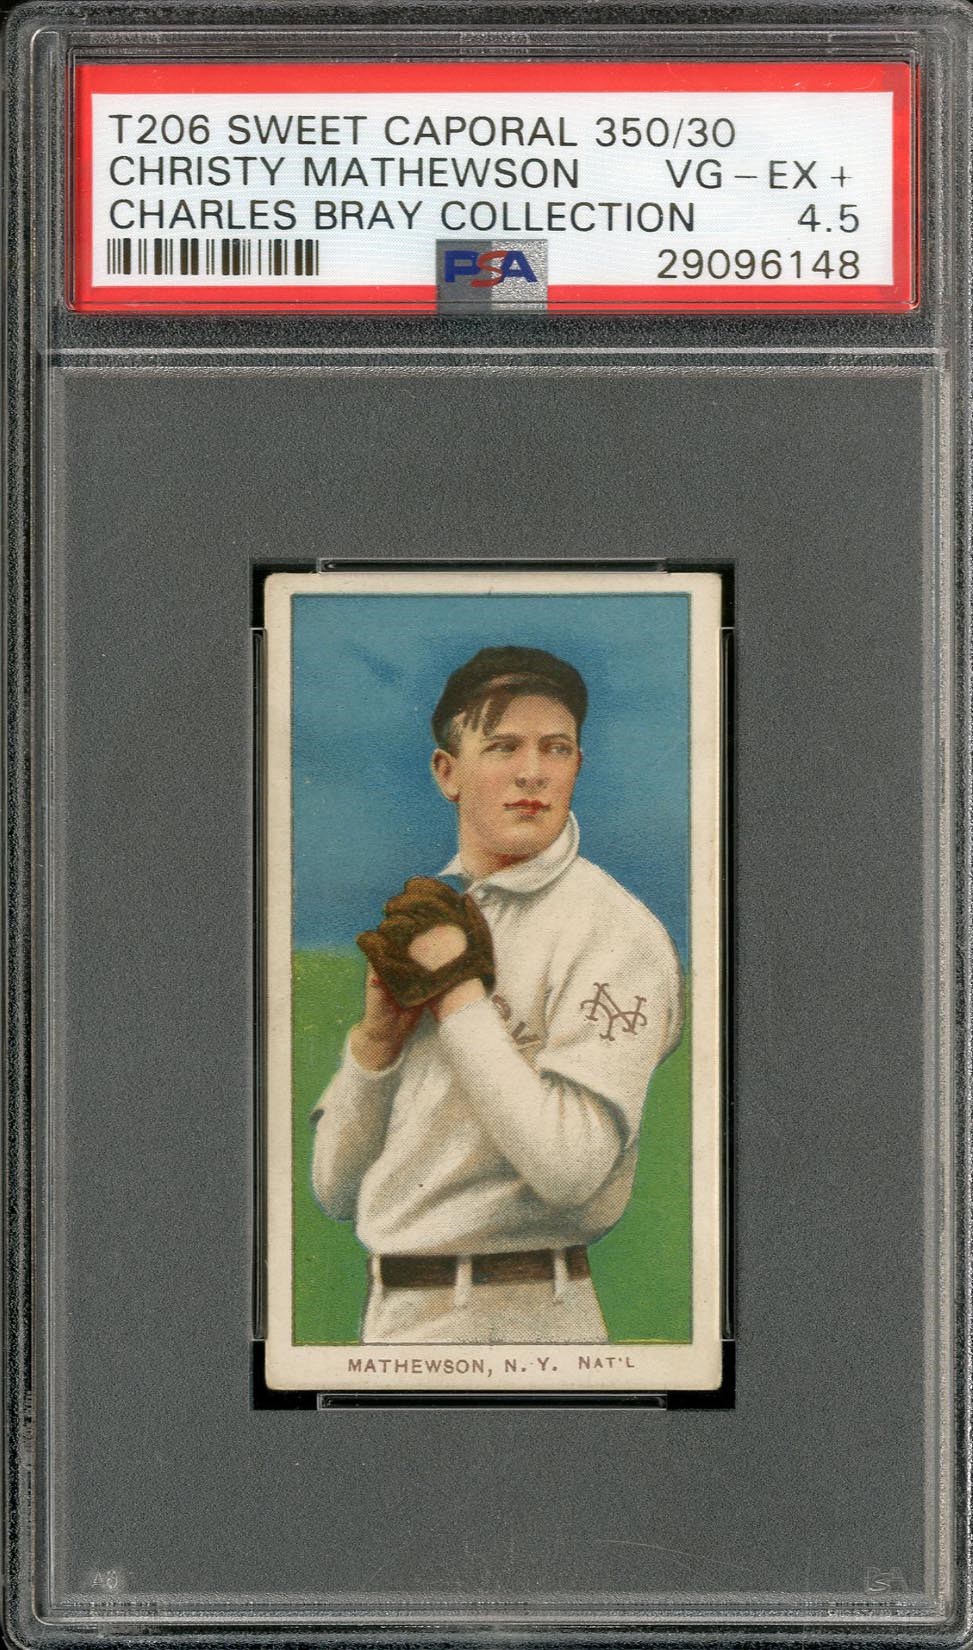 Baseball and Trading Cards - T206 Christy Mathewson Dark Cap PSA VG-EX+ 4.5 - The Charles Bray Collection